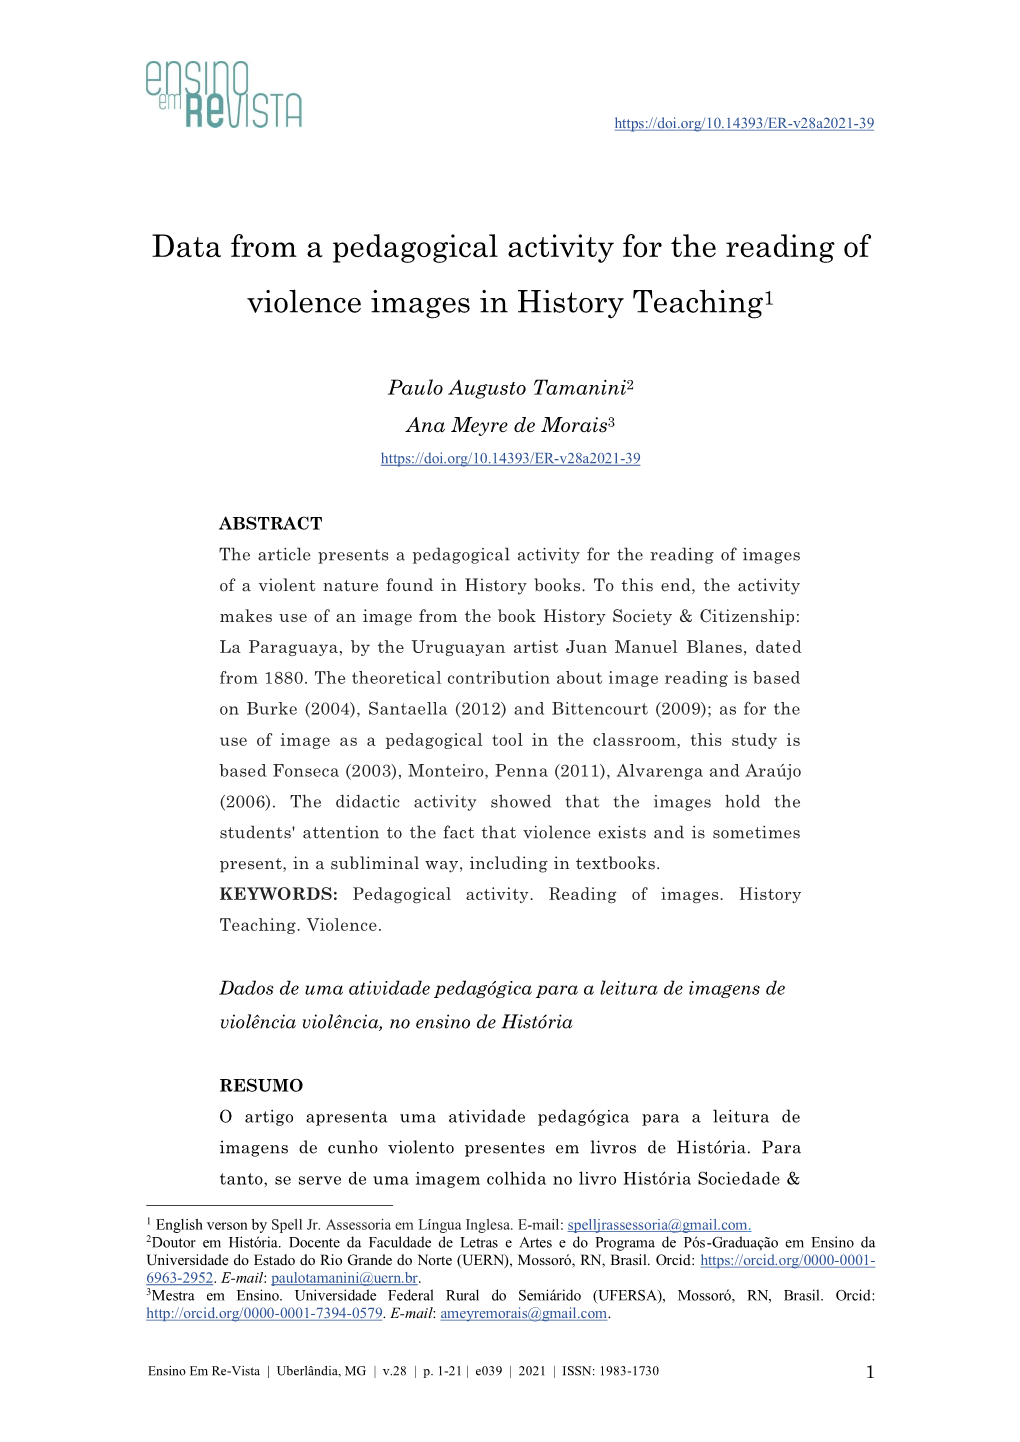 Data from a Pedagogical Activity for the Reading of Violence Images in History Teaching1